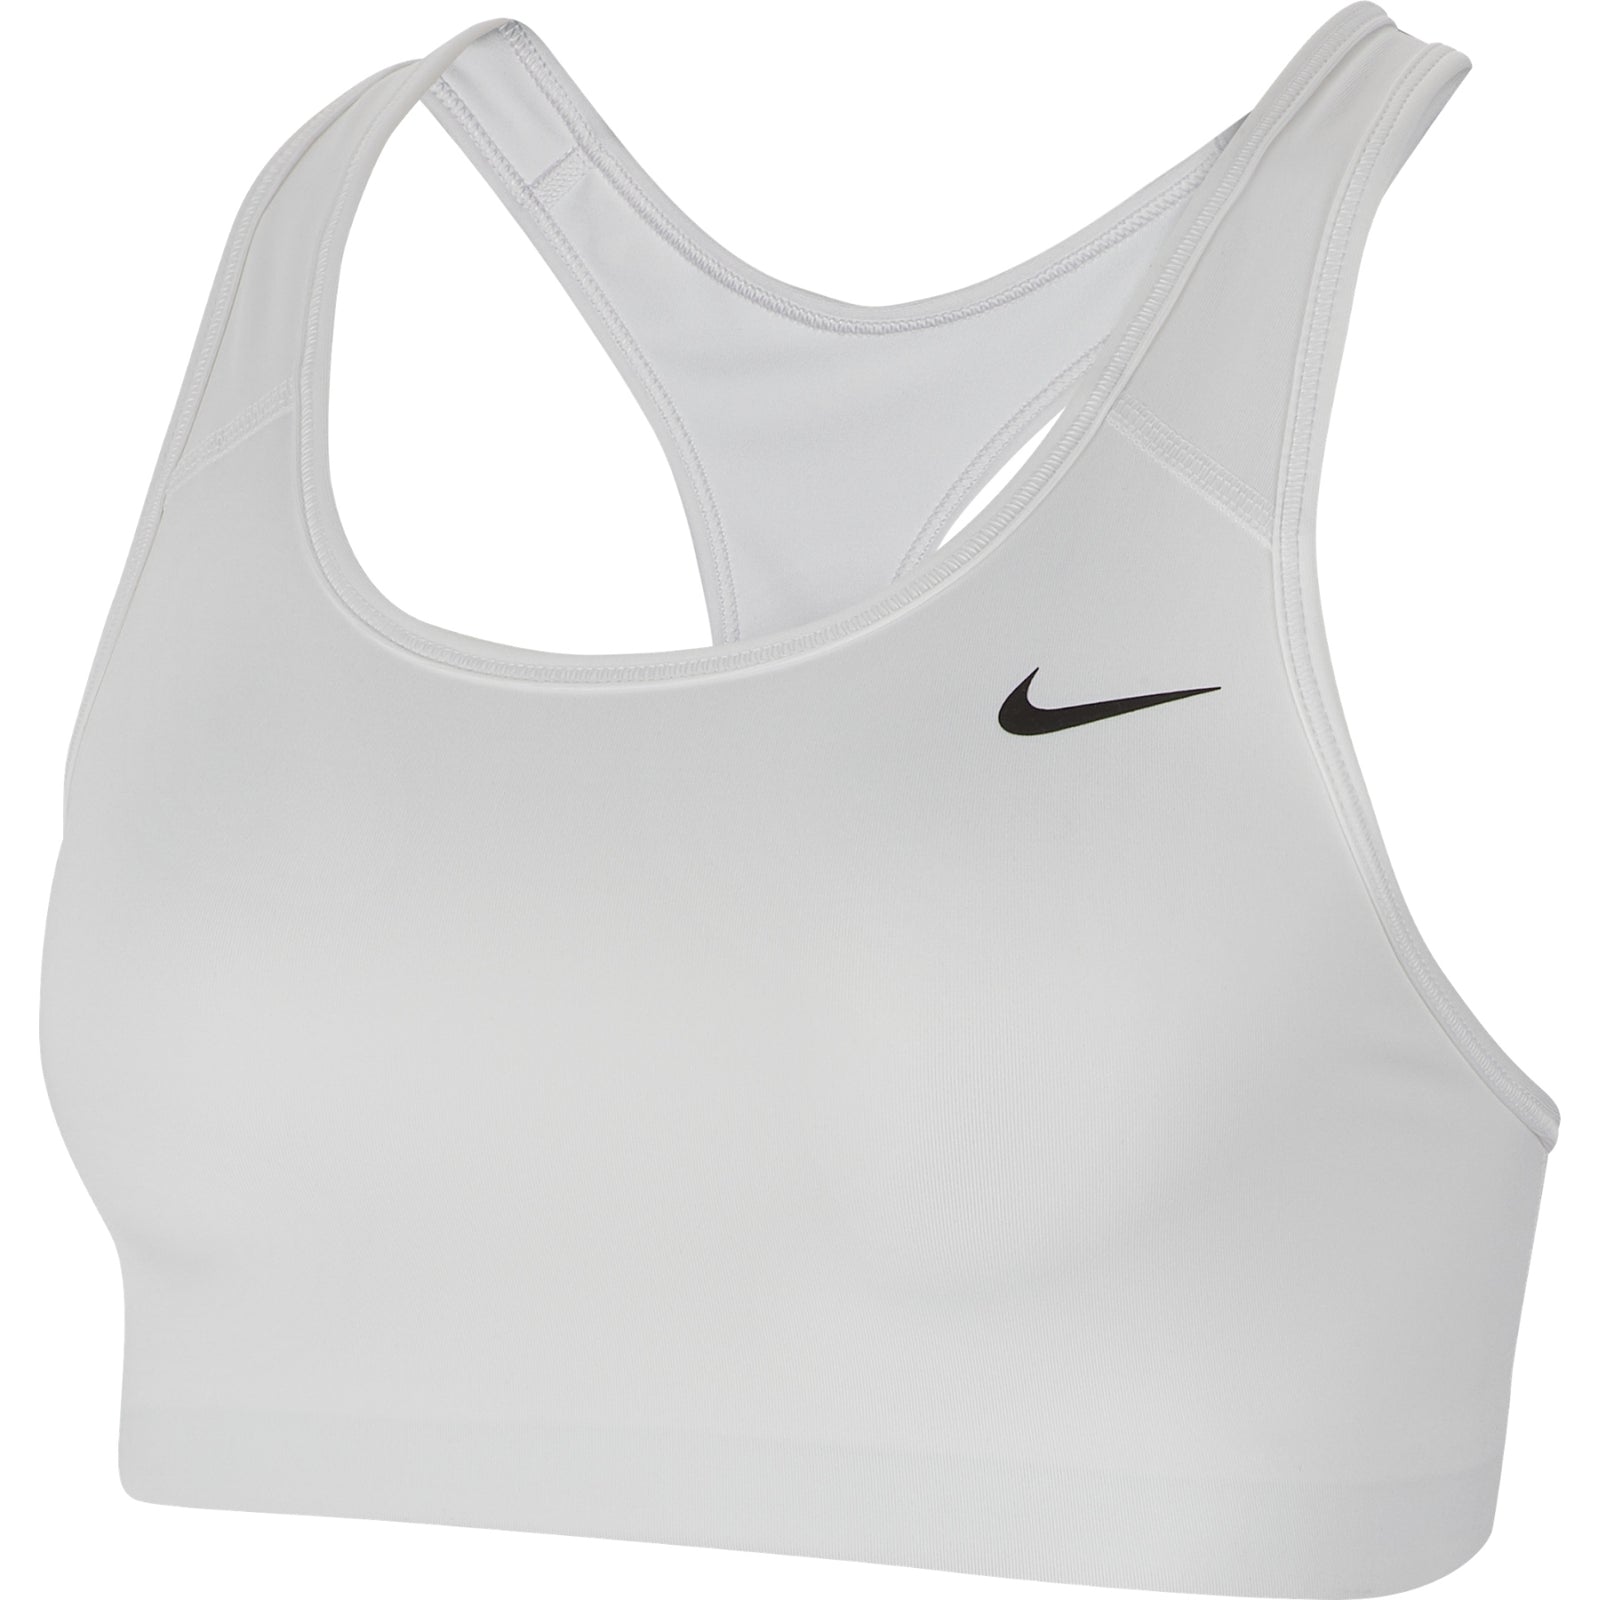 Nike DF SWSH BAND NONPDED BRA Grey / Black - Fast delivery